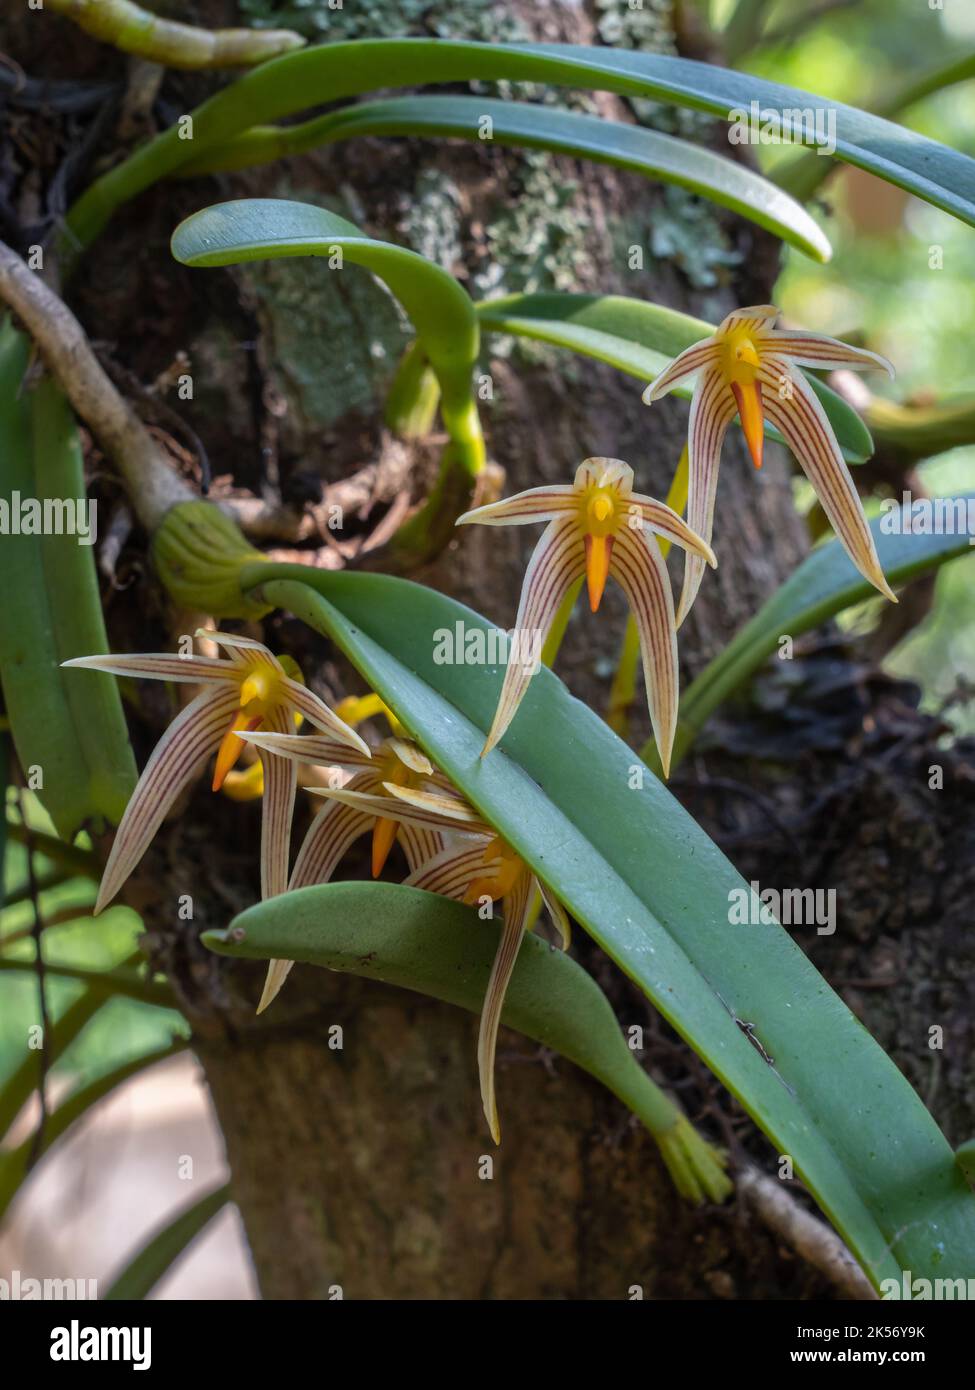 Closeup view of colorful epiphytic orchid species bulbophyllum affine flowers blooming outdoors on natural background Stock Photo